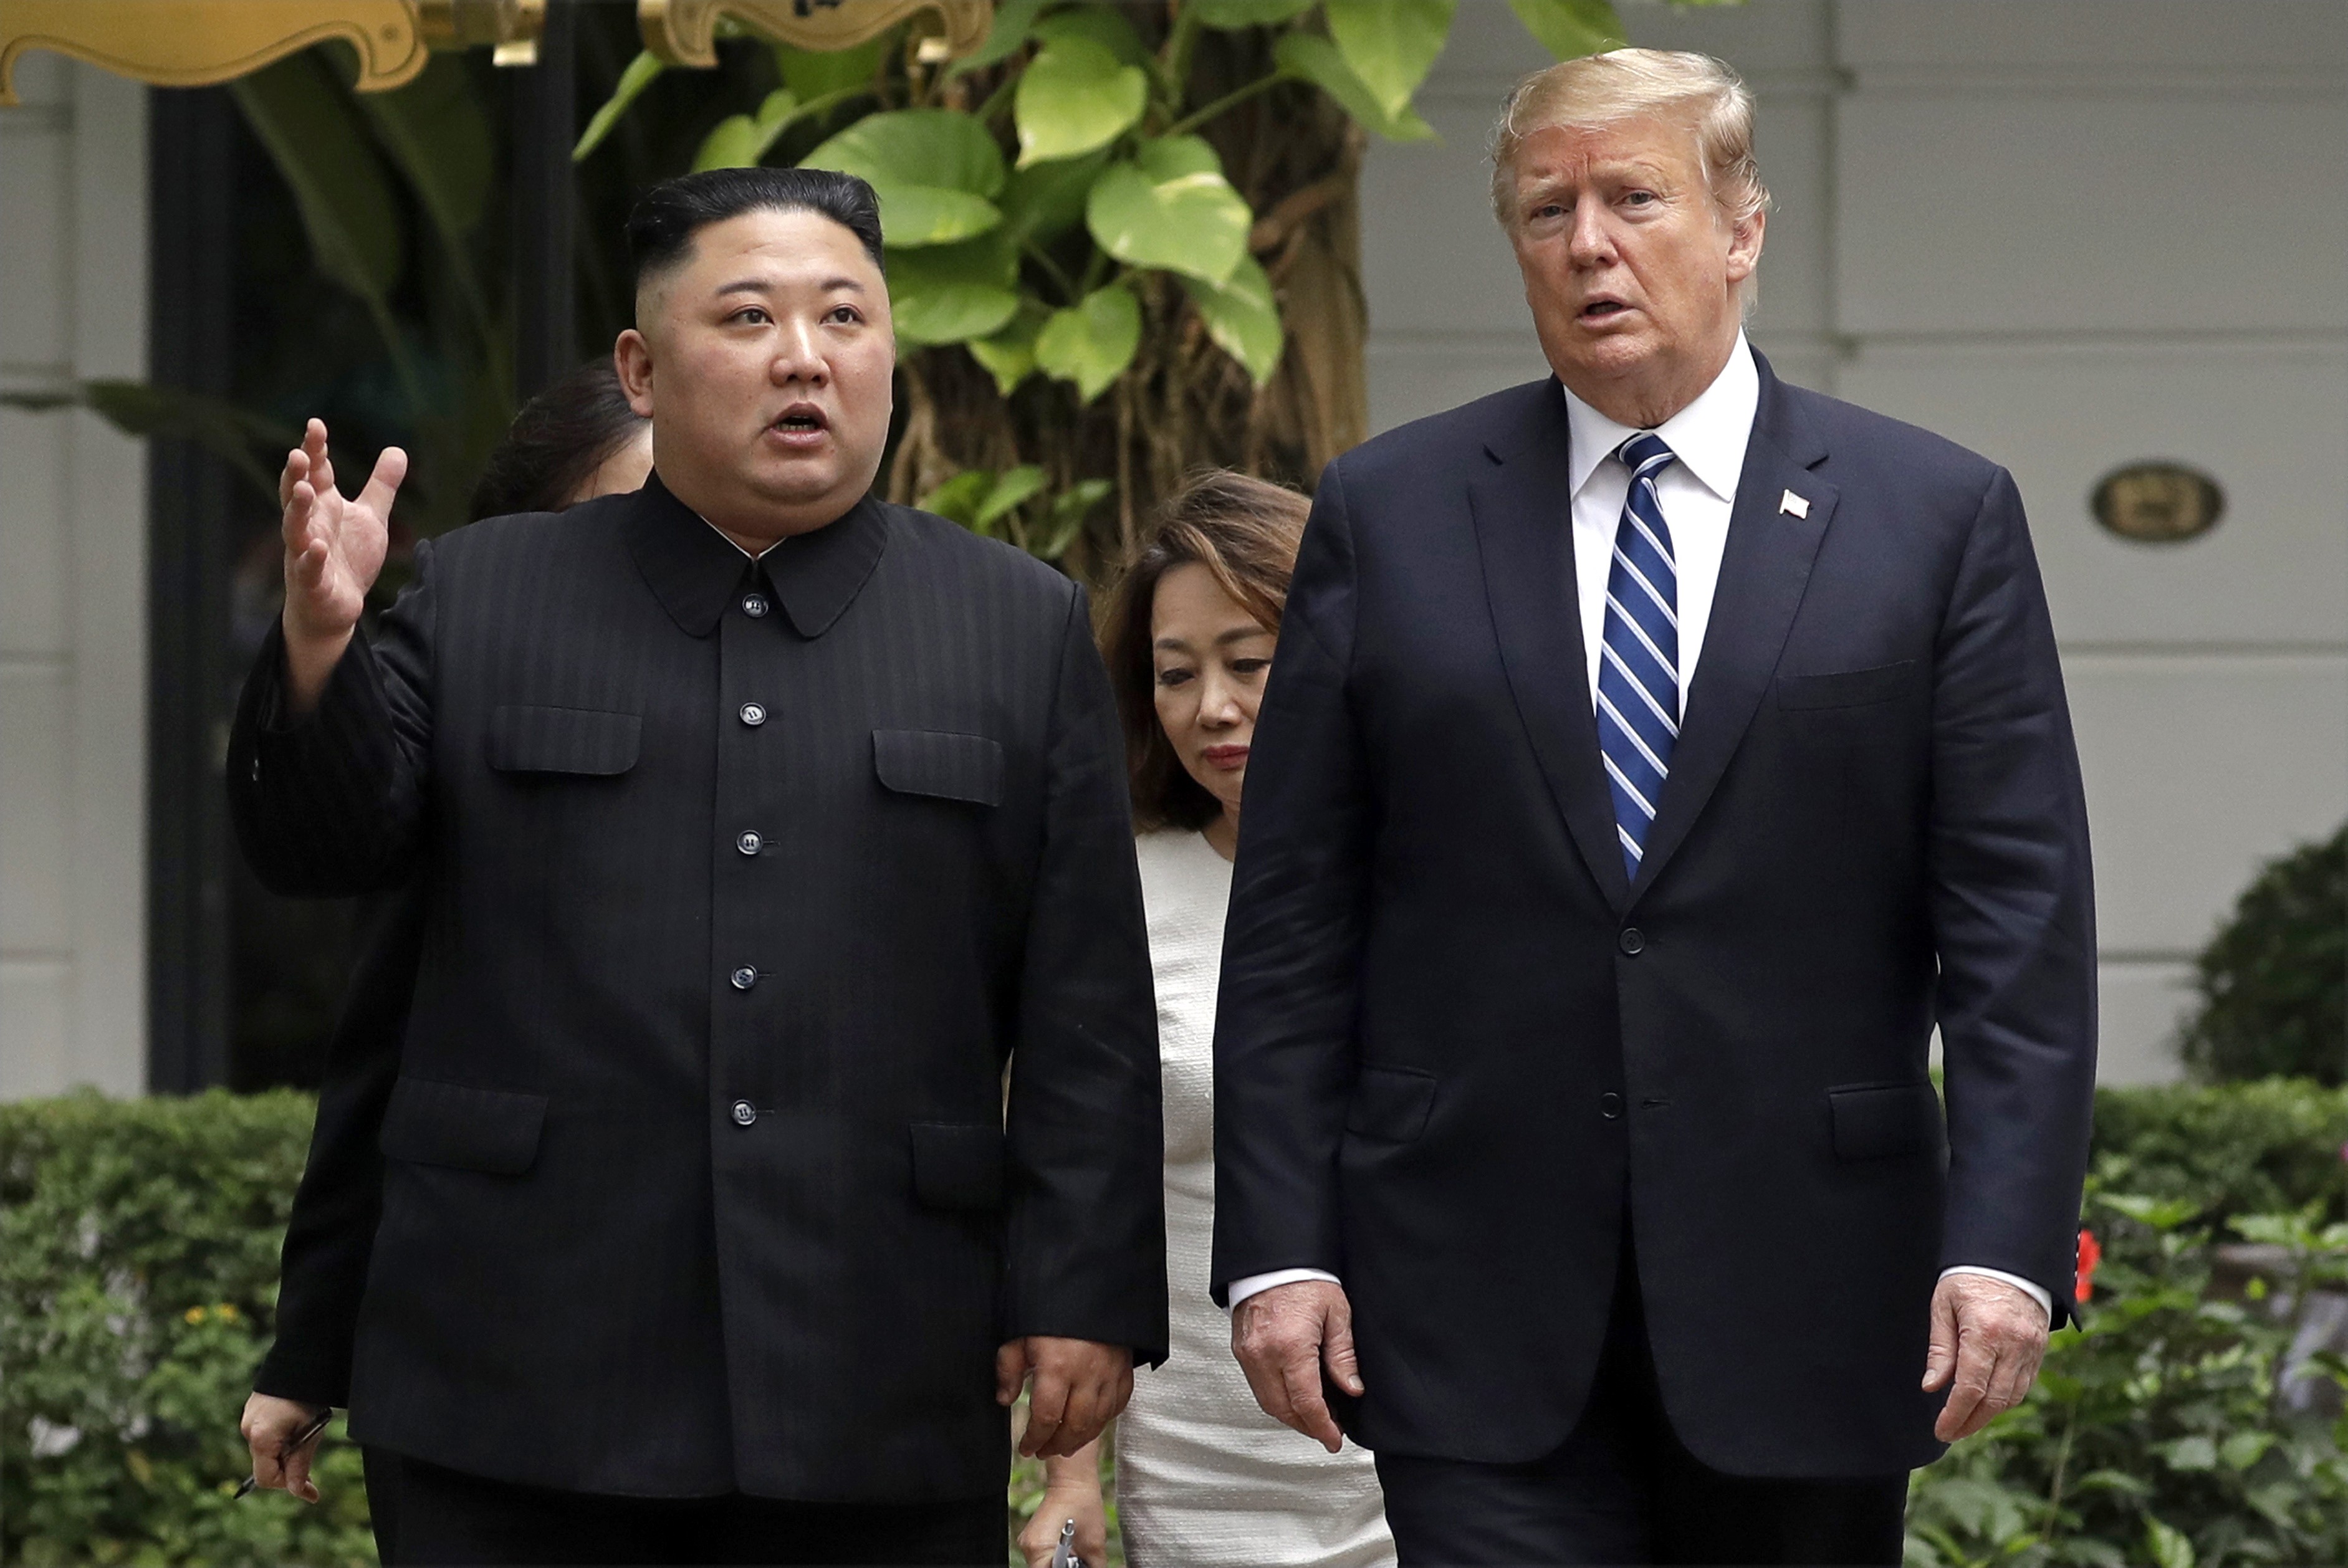 North Korean leader Kim Jong-un and US President Donald Trump have met three times, but working-level negotiations have yet to take place. Photo: AP